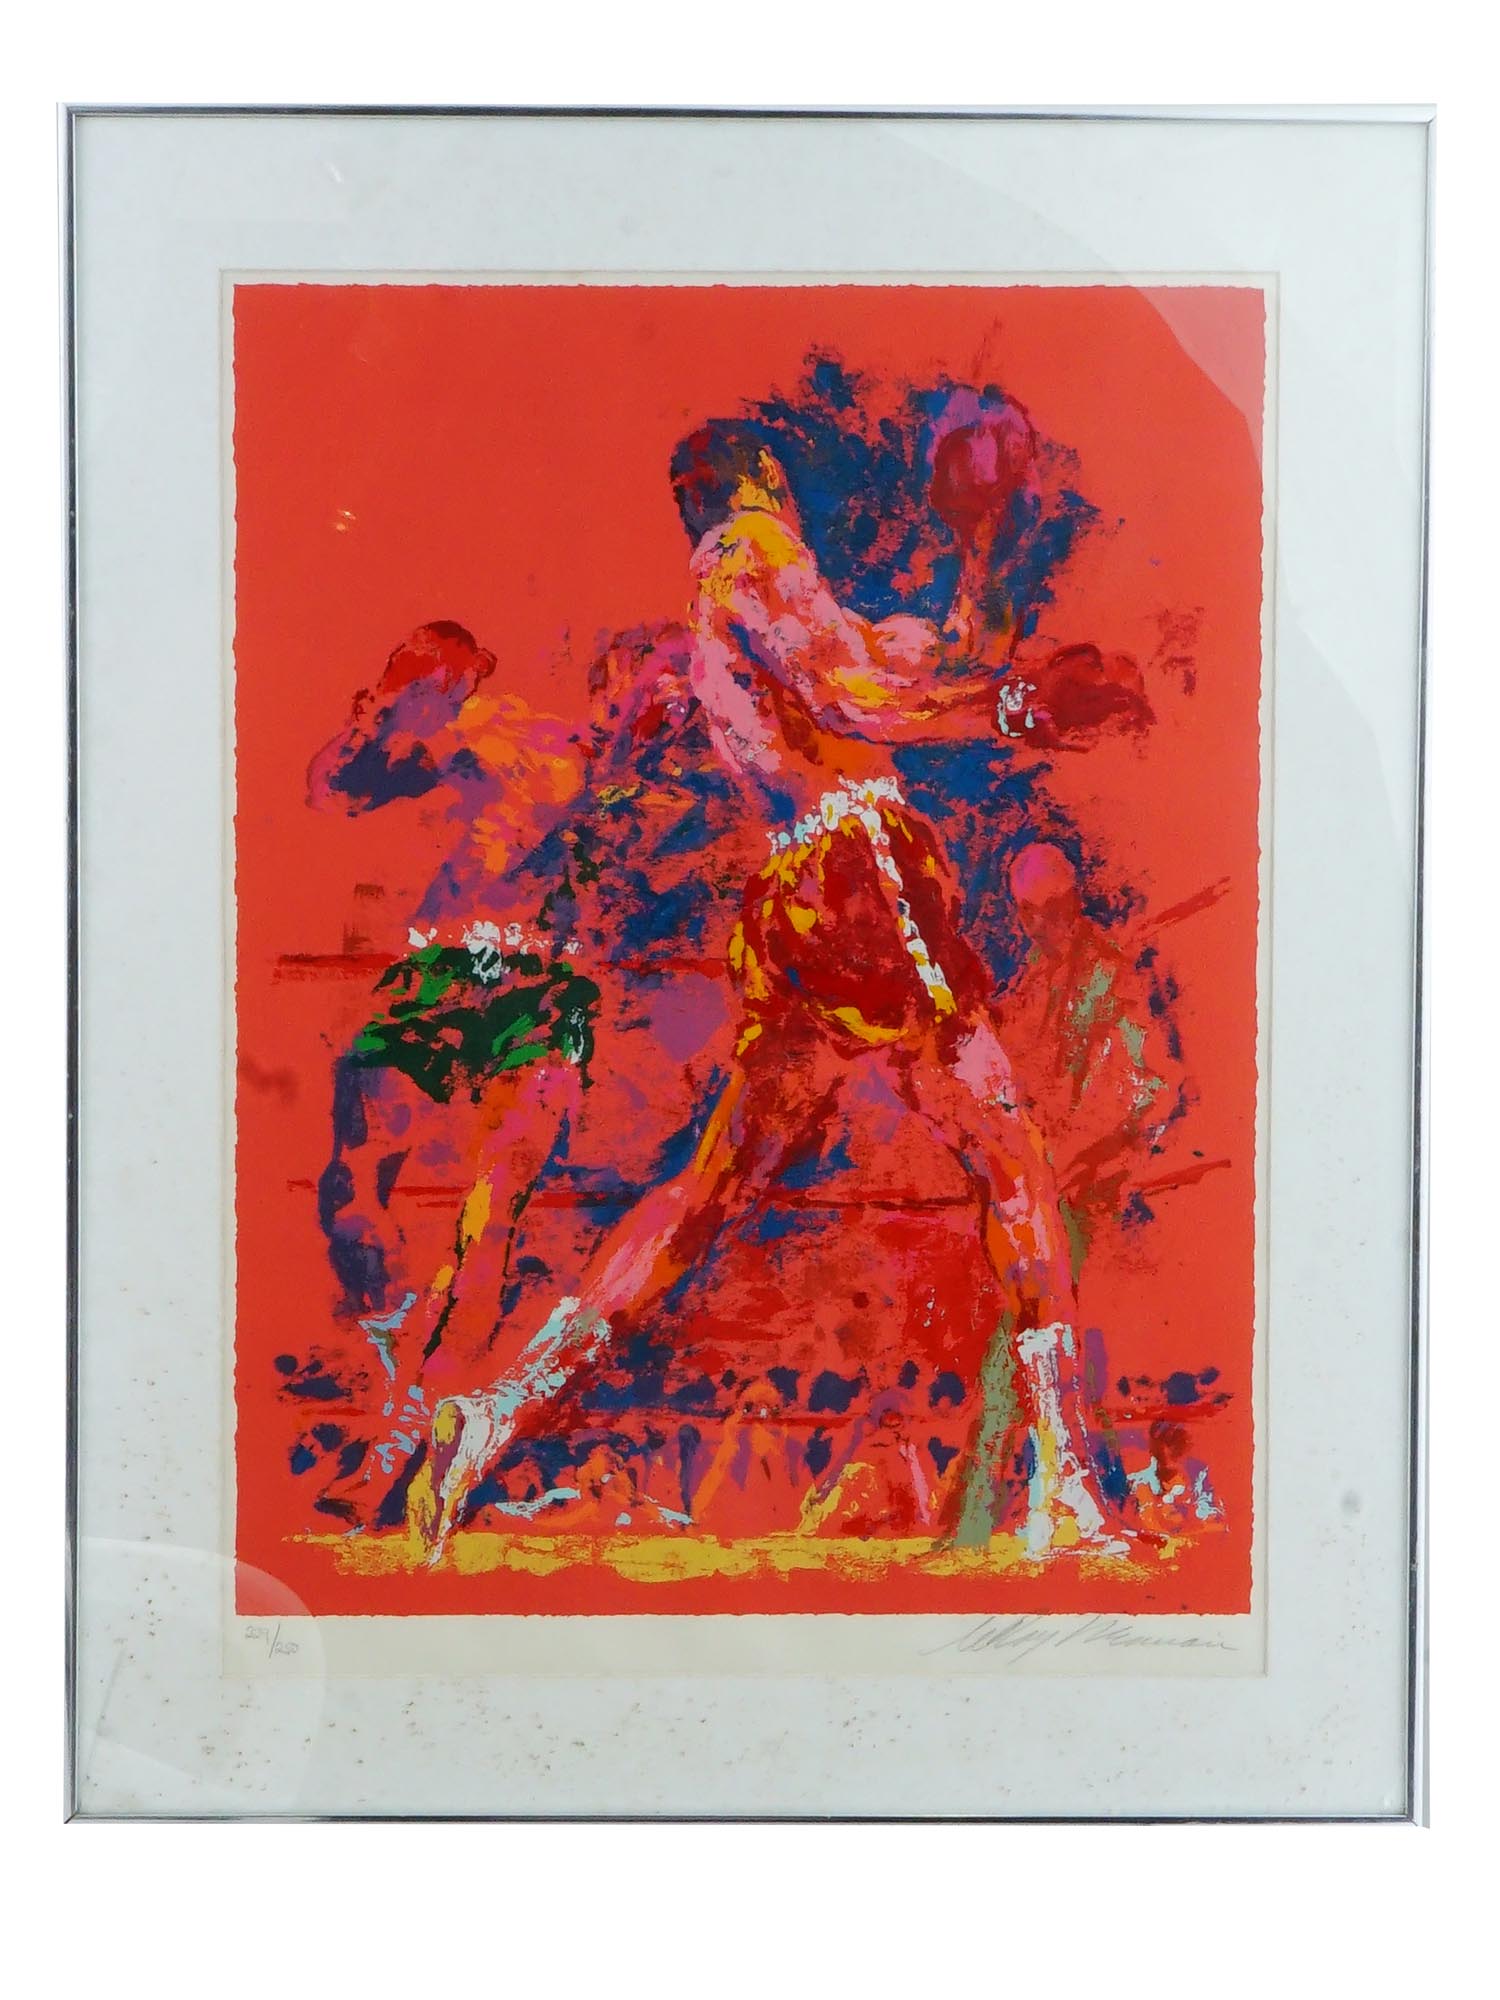 LIMITED ED ART SERIGRAPH PRINT BY LEROY NEIMAN PIC-0